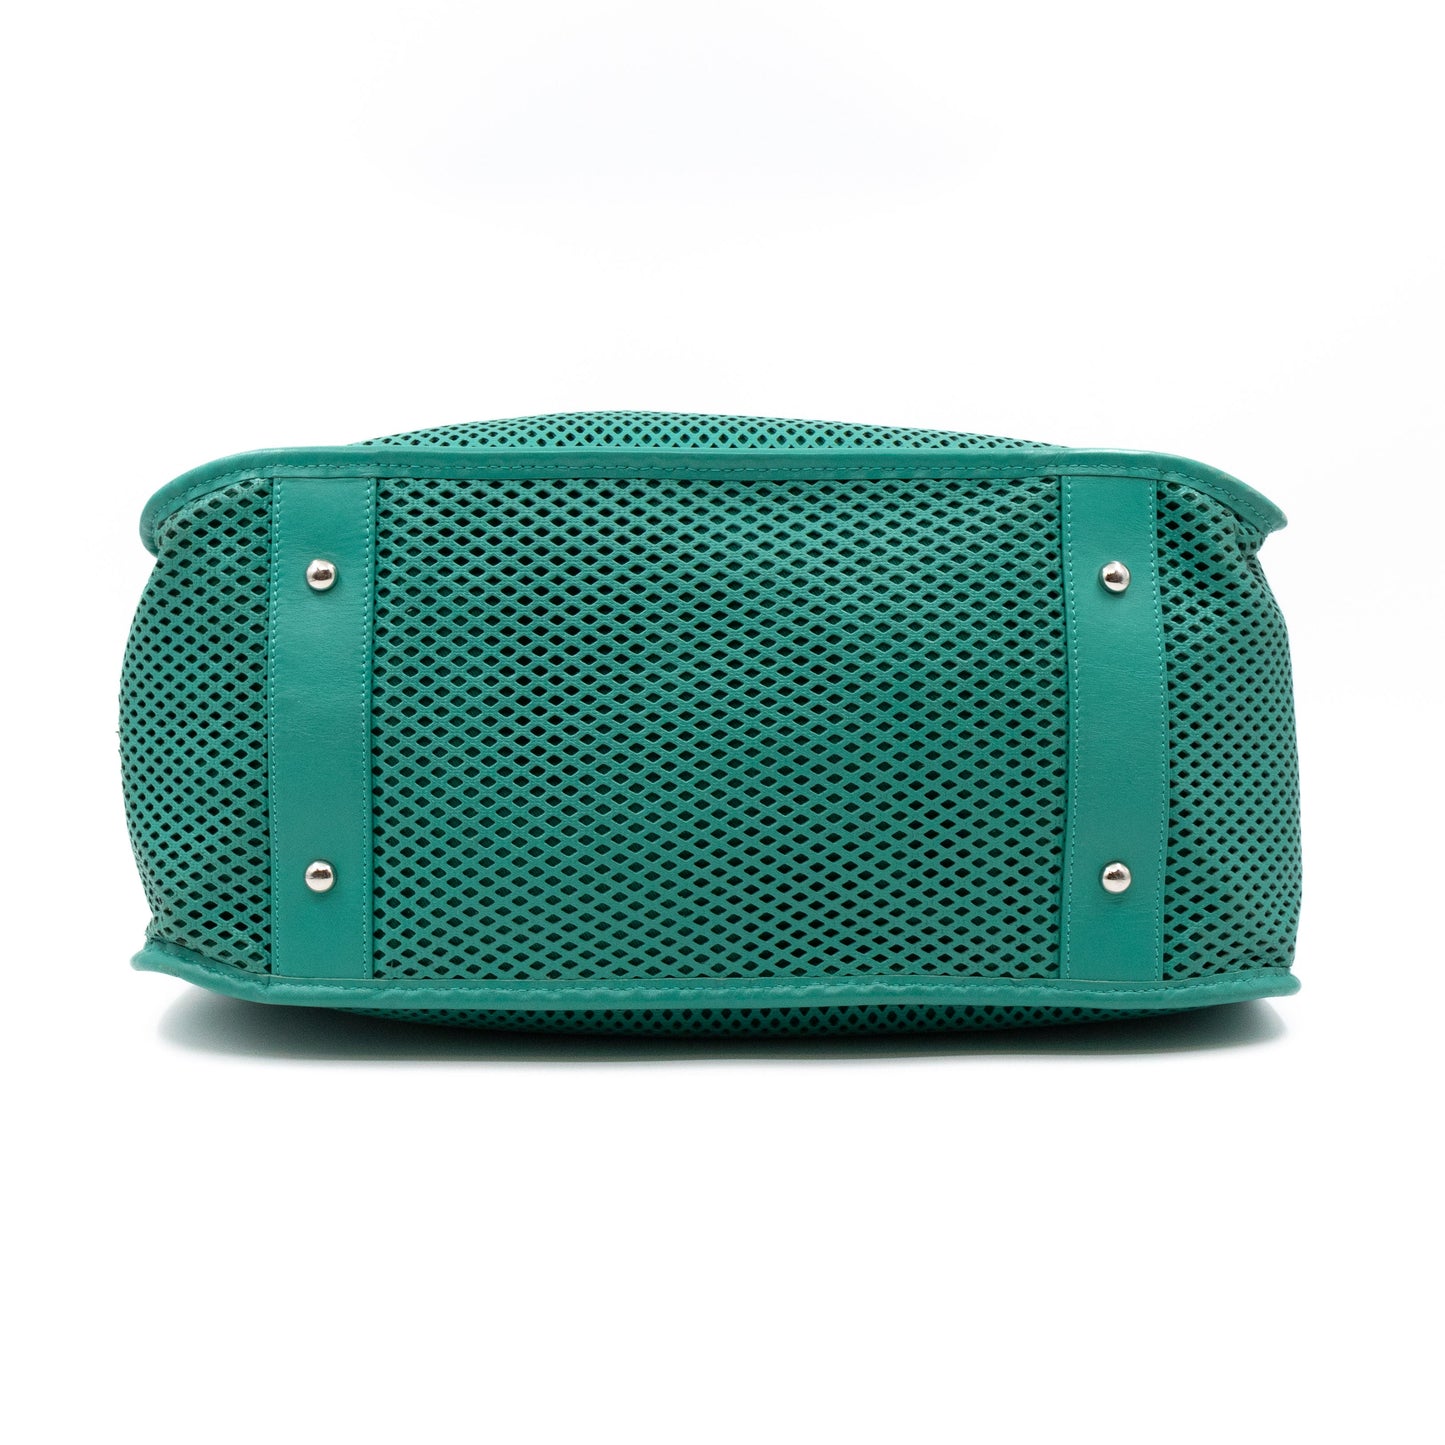 Up In The Air Tote Green Perforated Leather